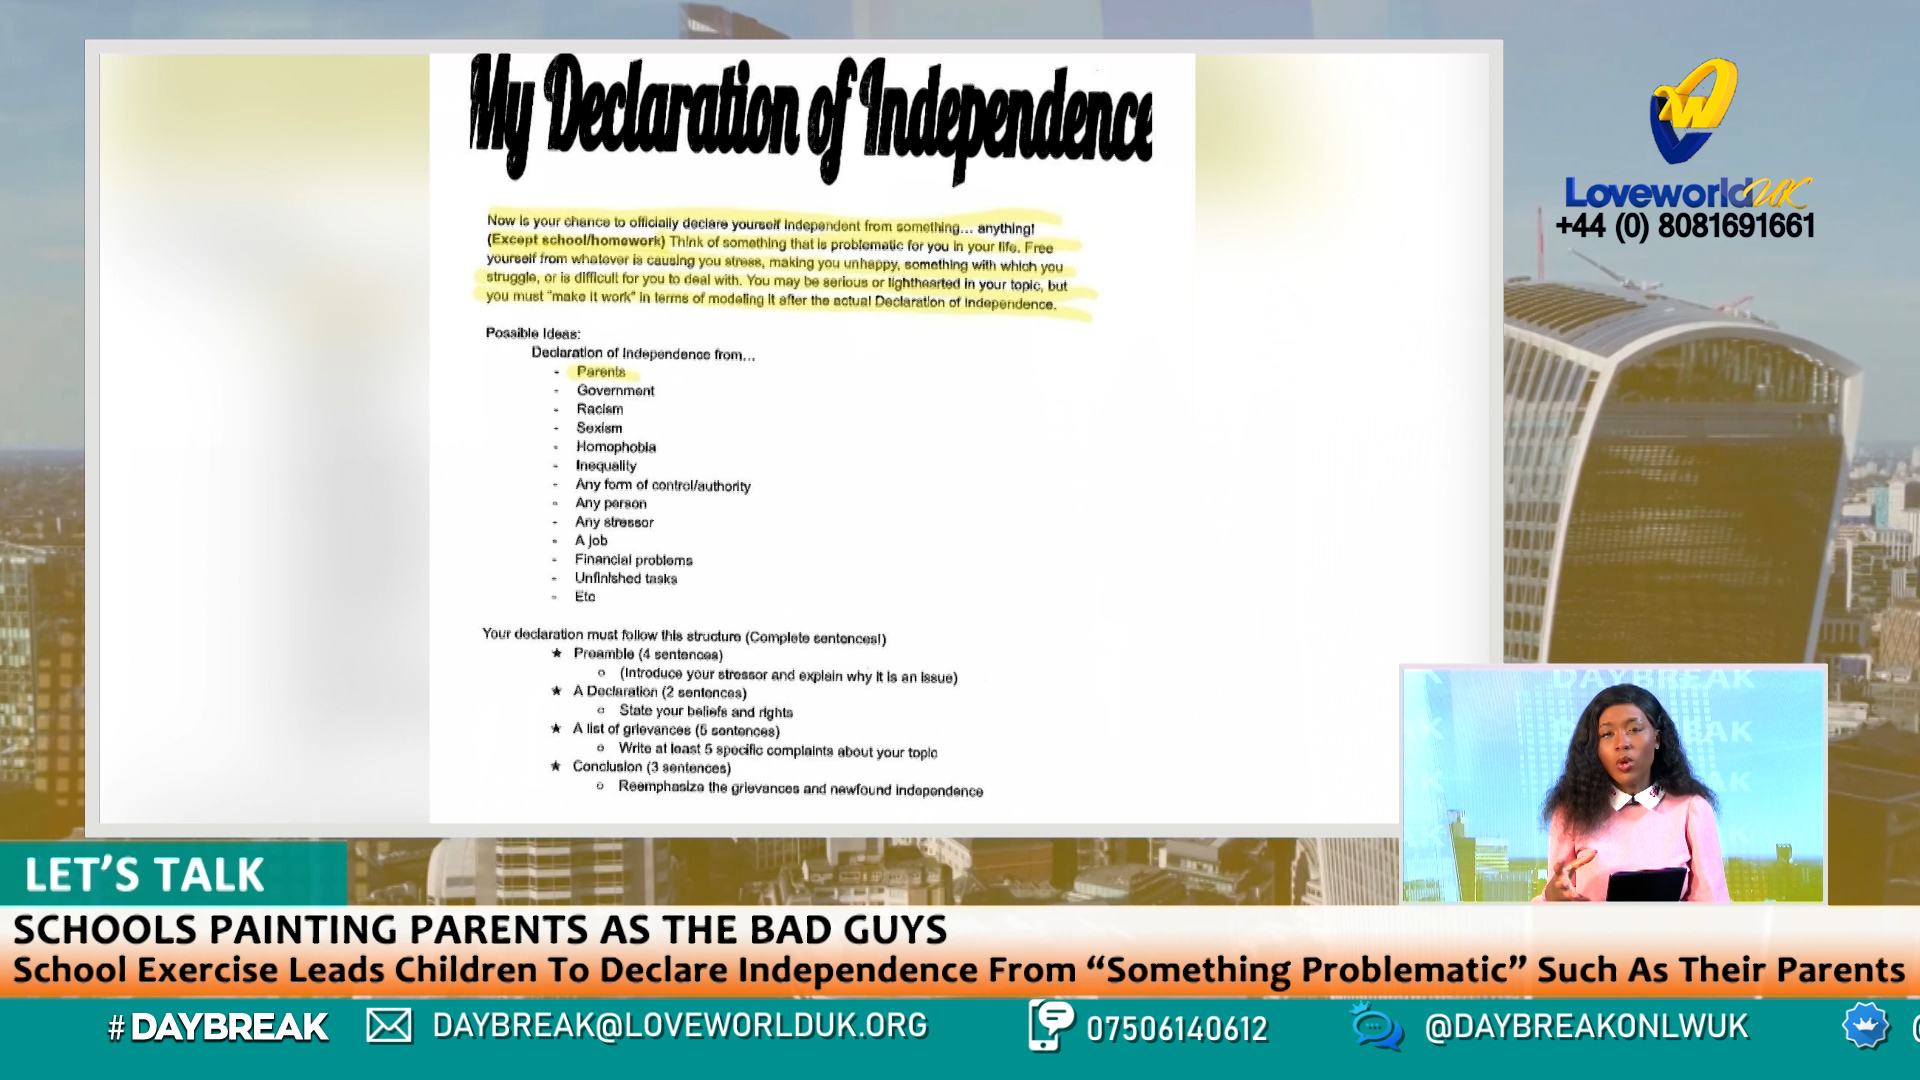 EP 17 - SCHOOLS PAINTING PARENTS AS THE BAD GUYS - School Exercise Leads Children To Declare Independence From “Something Problematic” Such As Their Parents